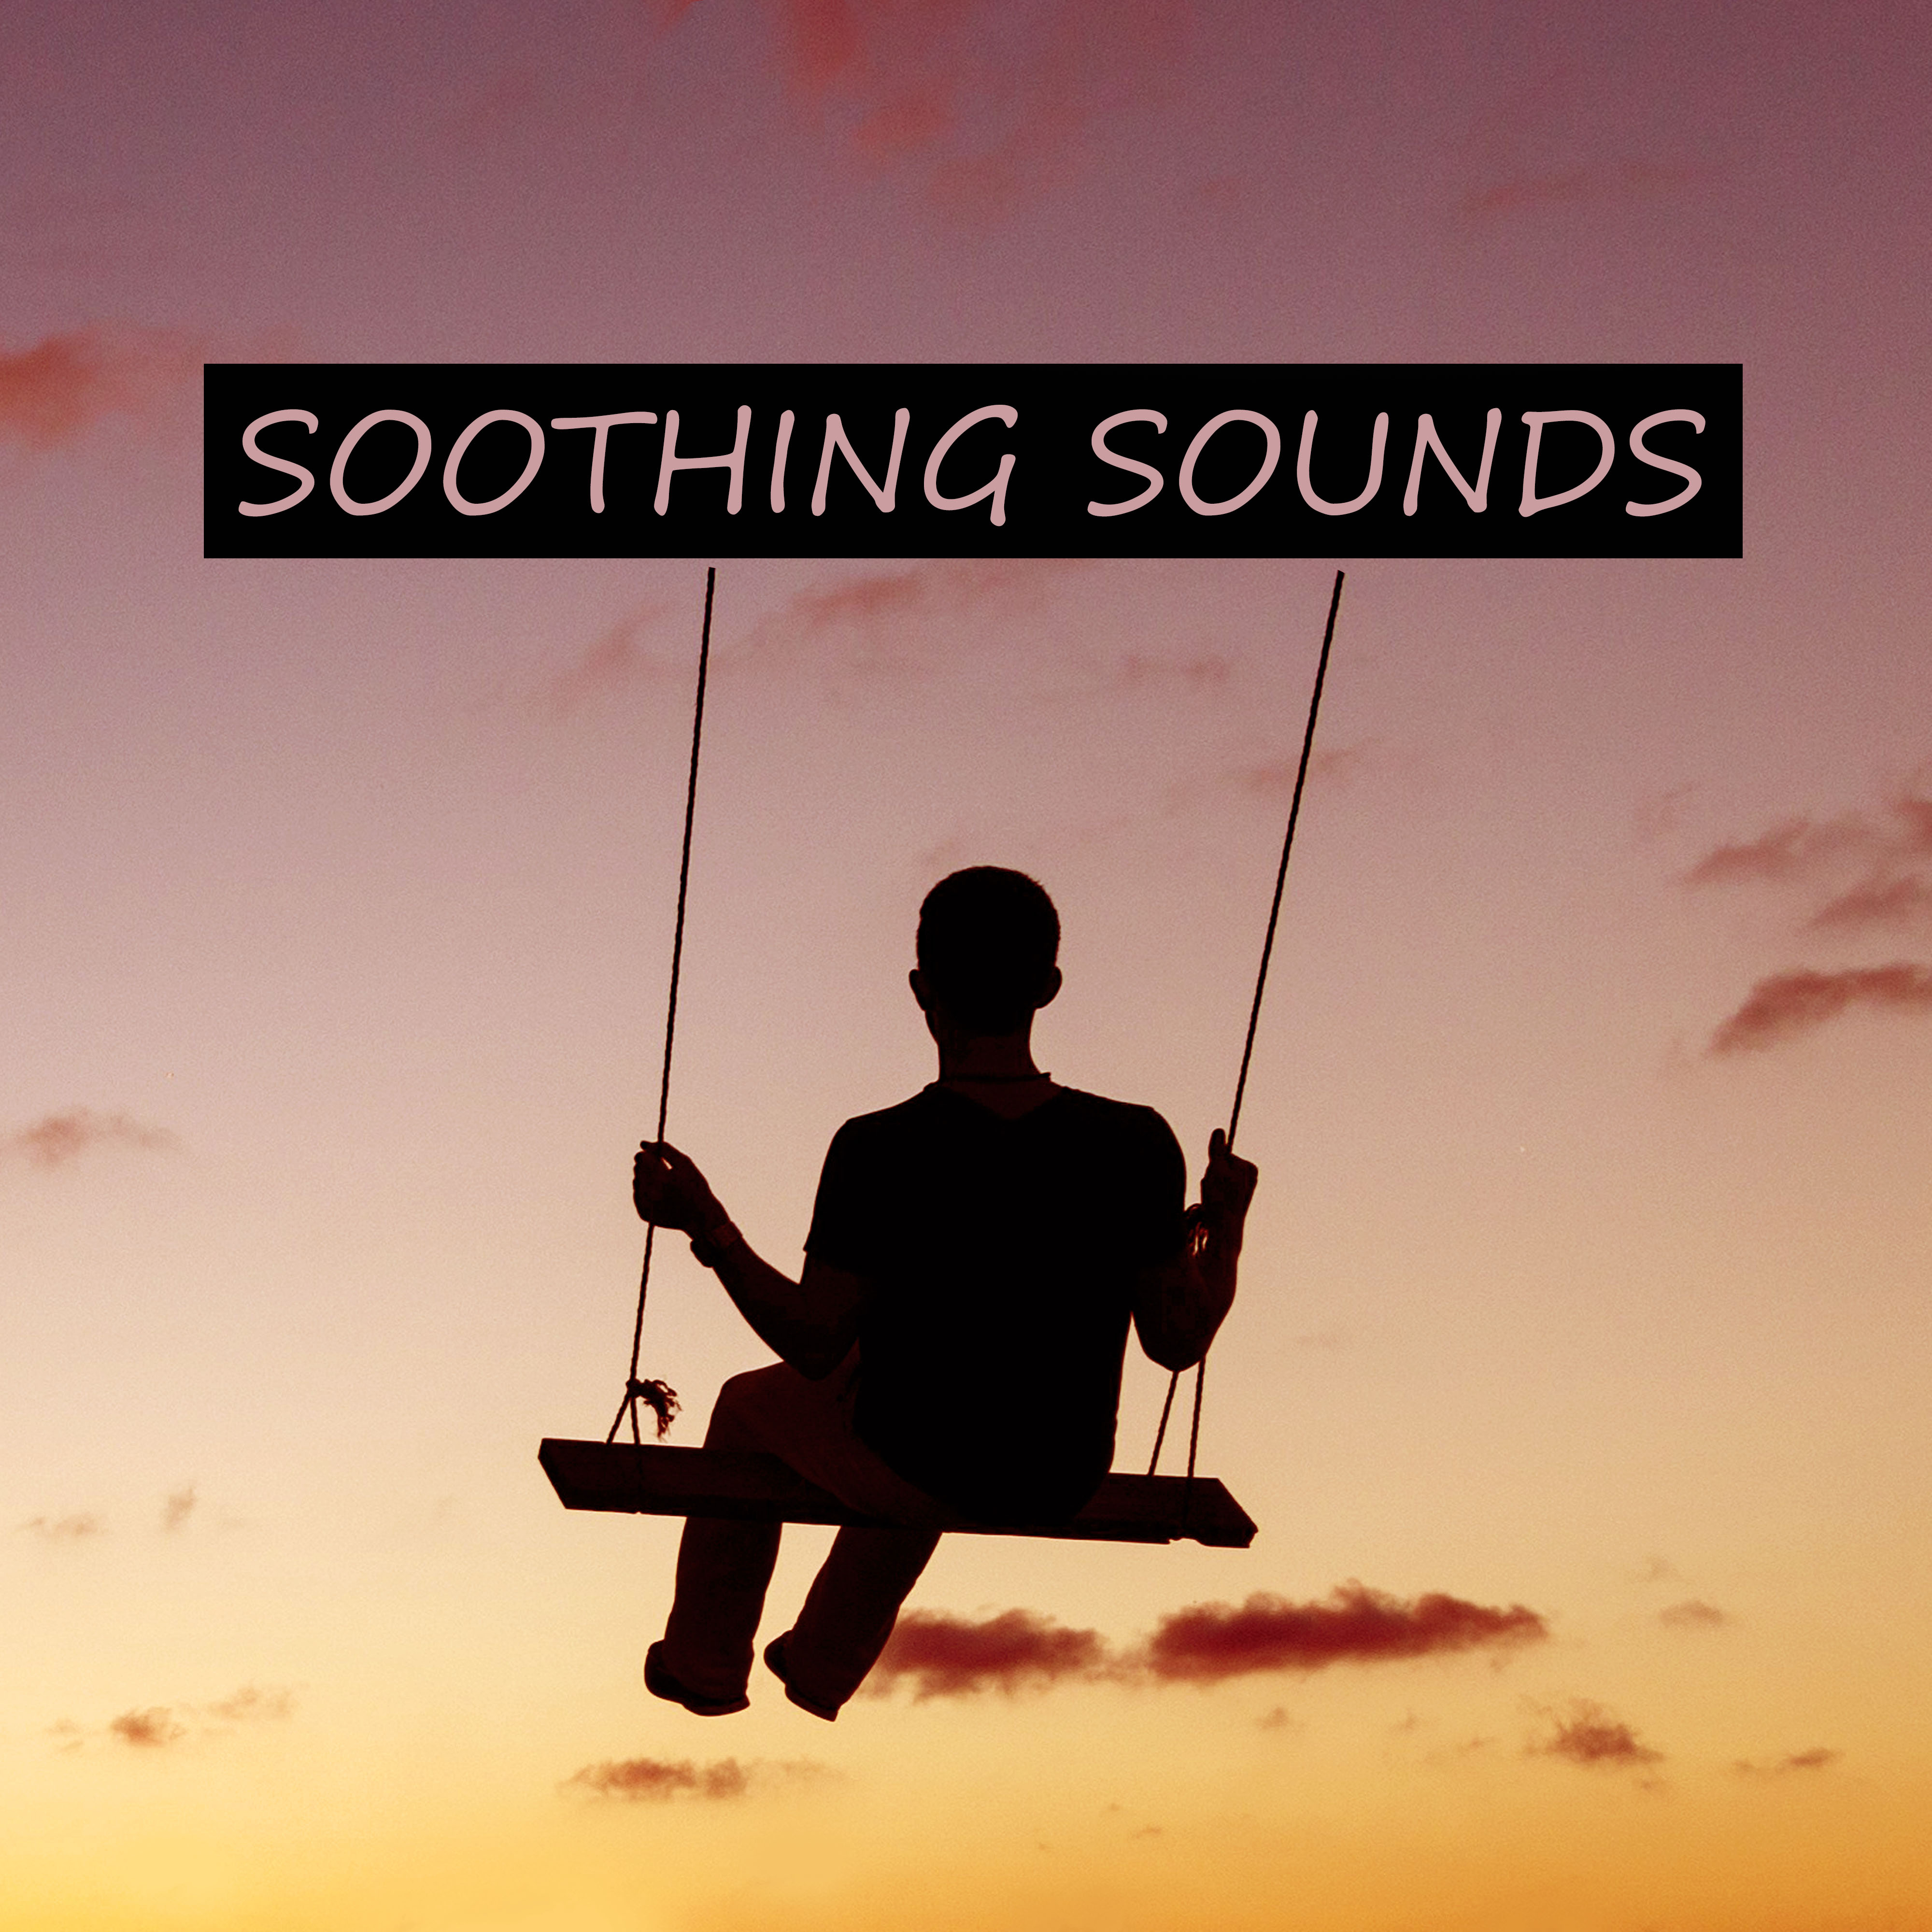 Soothing Sounds  Take Your Time, Nature Sounds to Relax, Yoga  Tai Chi Deep Relaxation